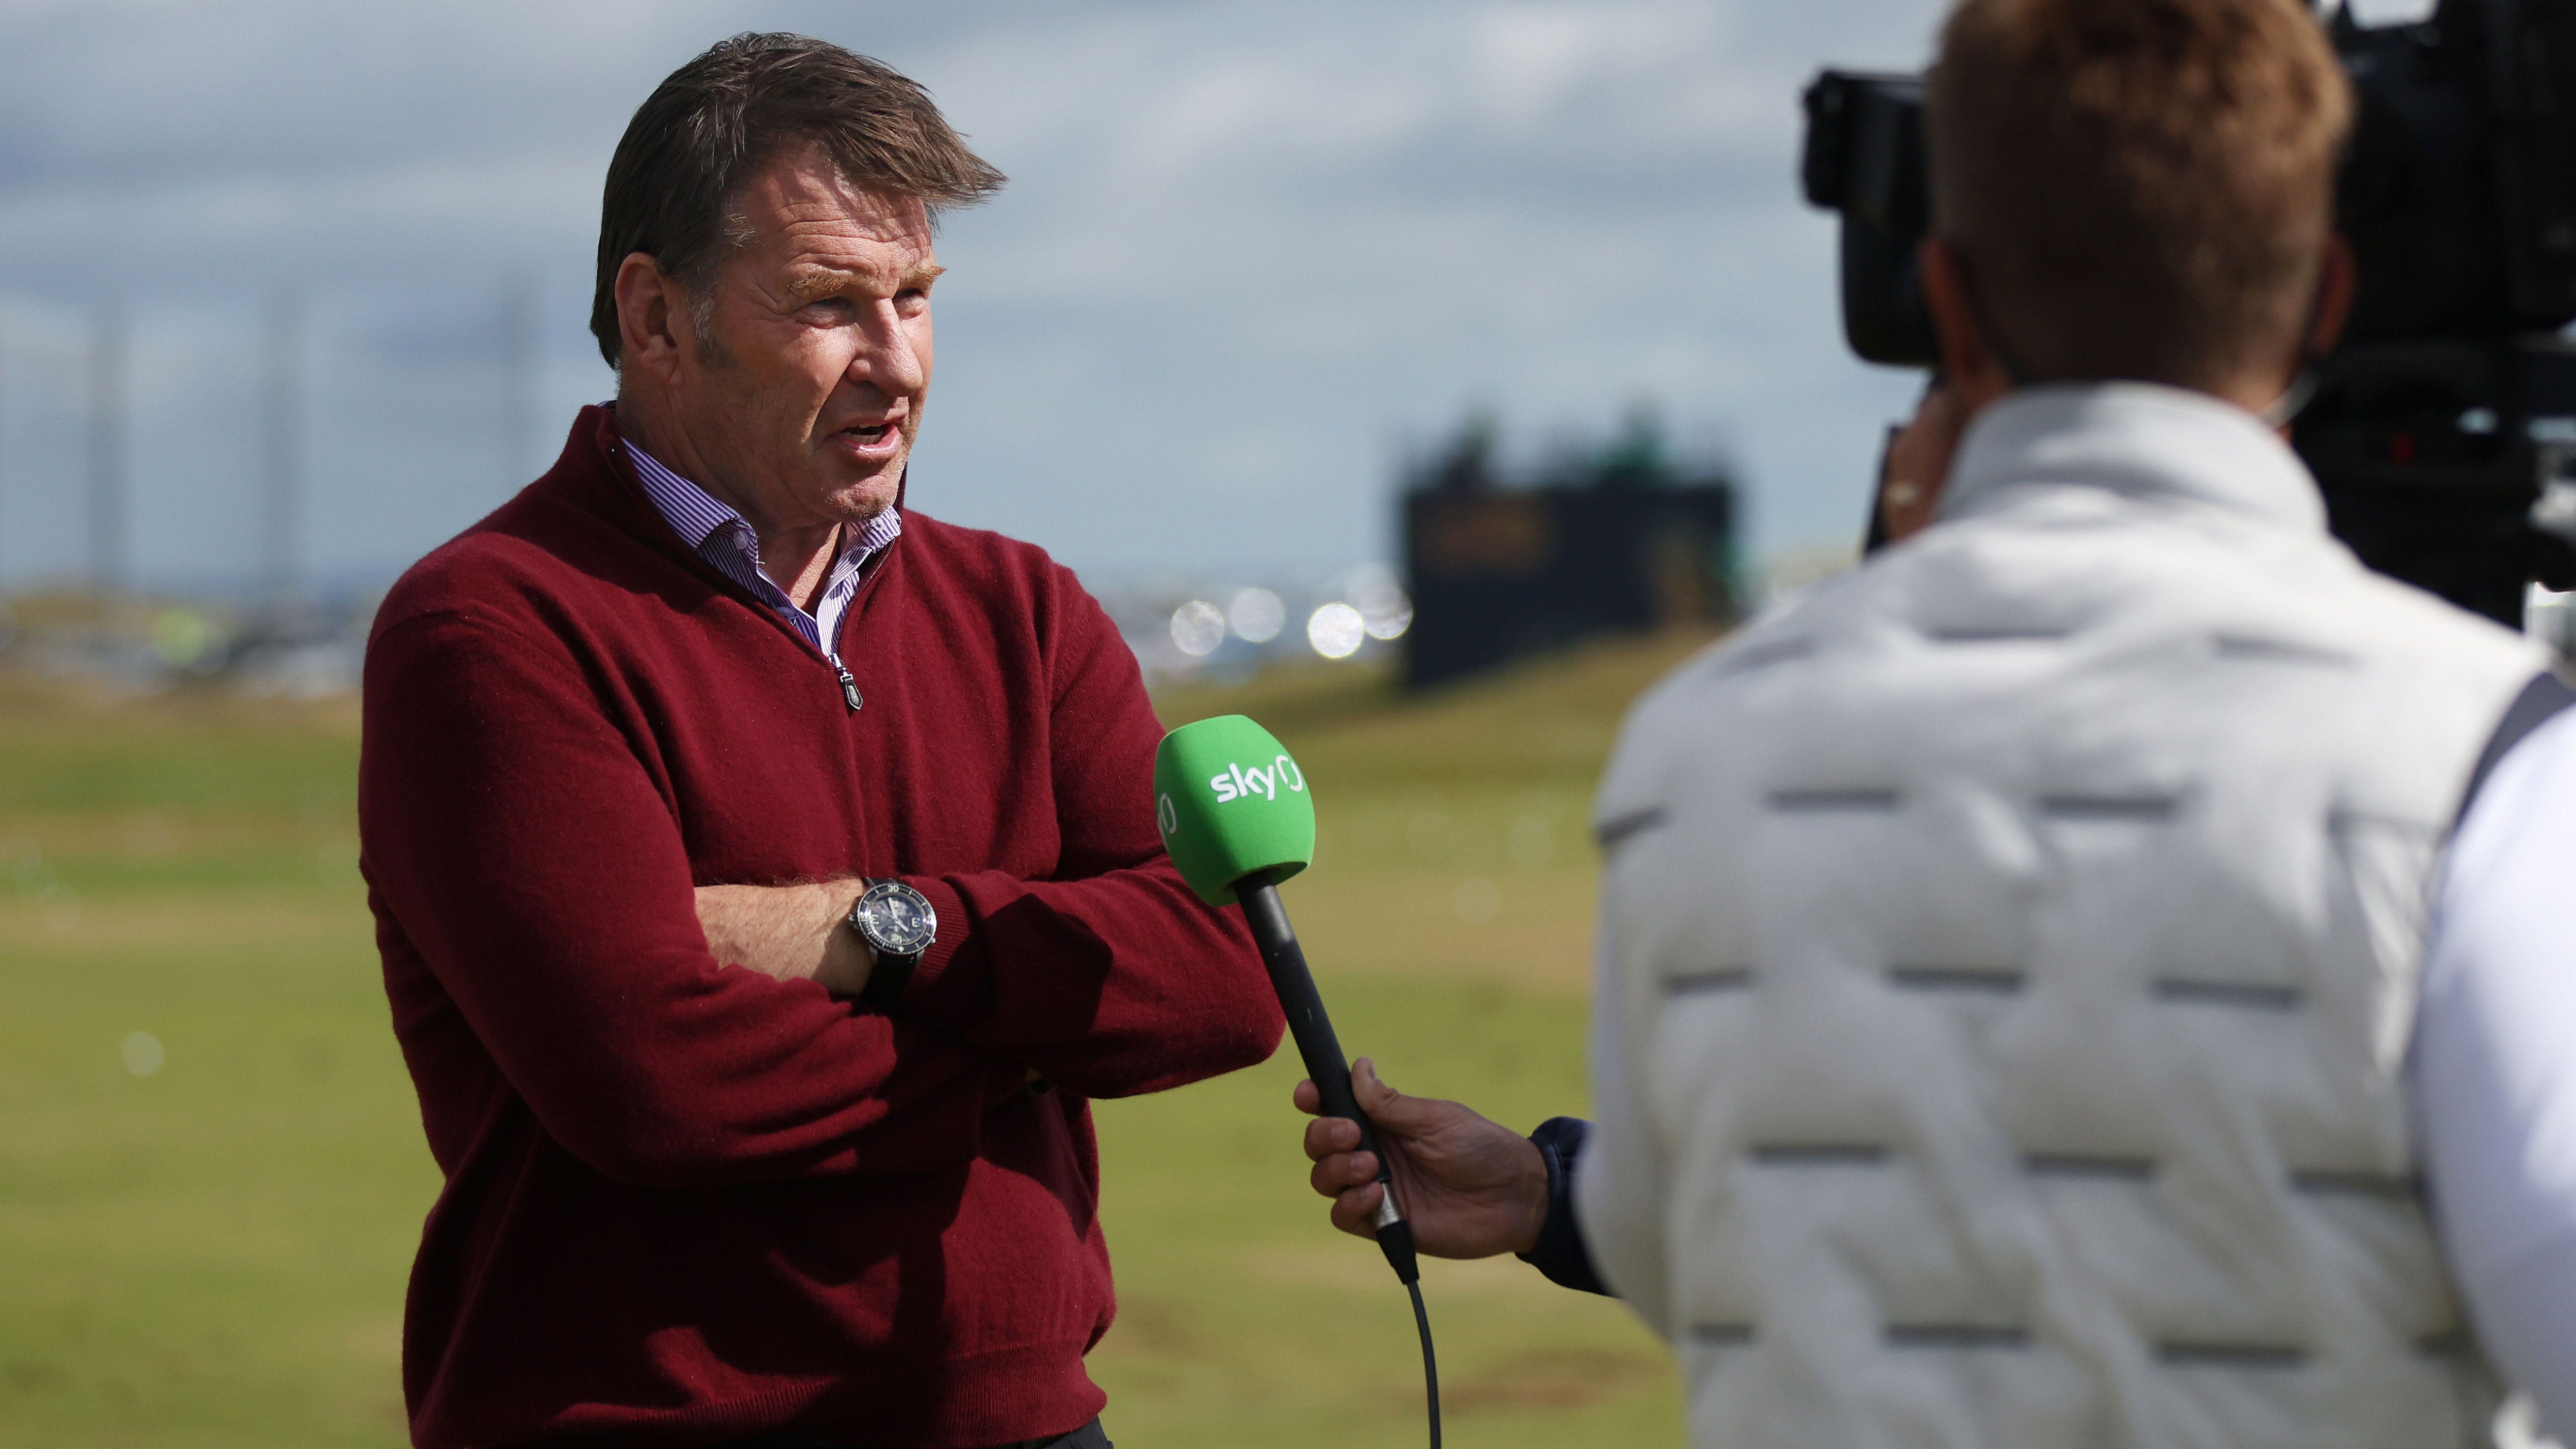 Retired golf analyst Nick Faldo breaks down in tears after 16 years on the air: ‘I’m ready’